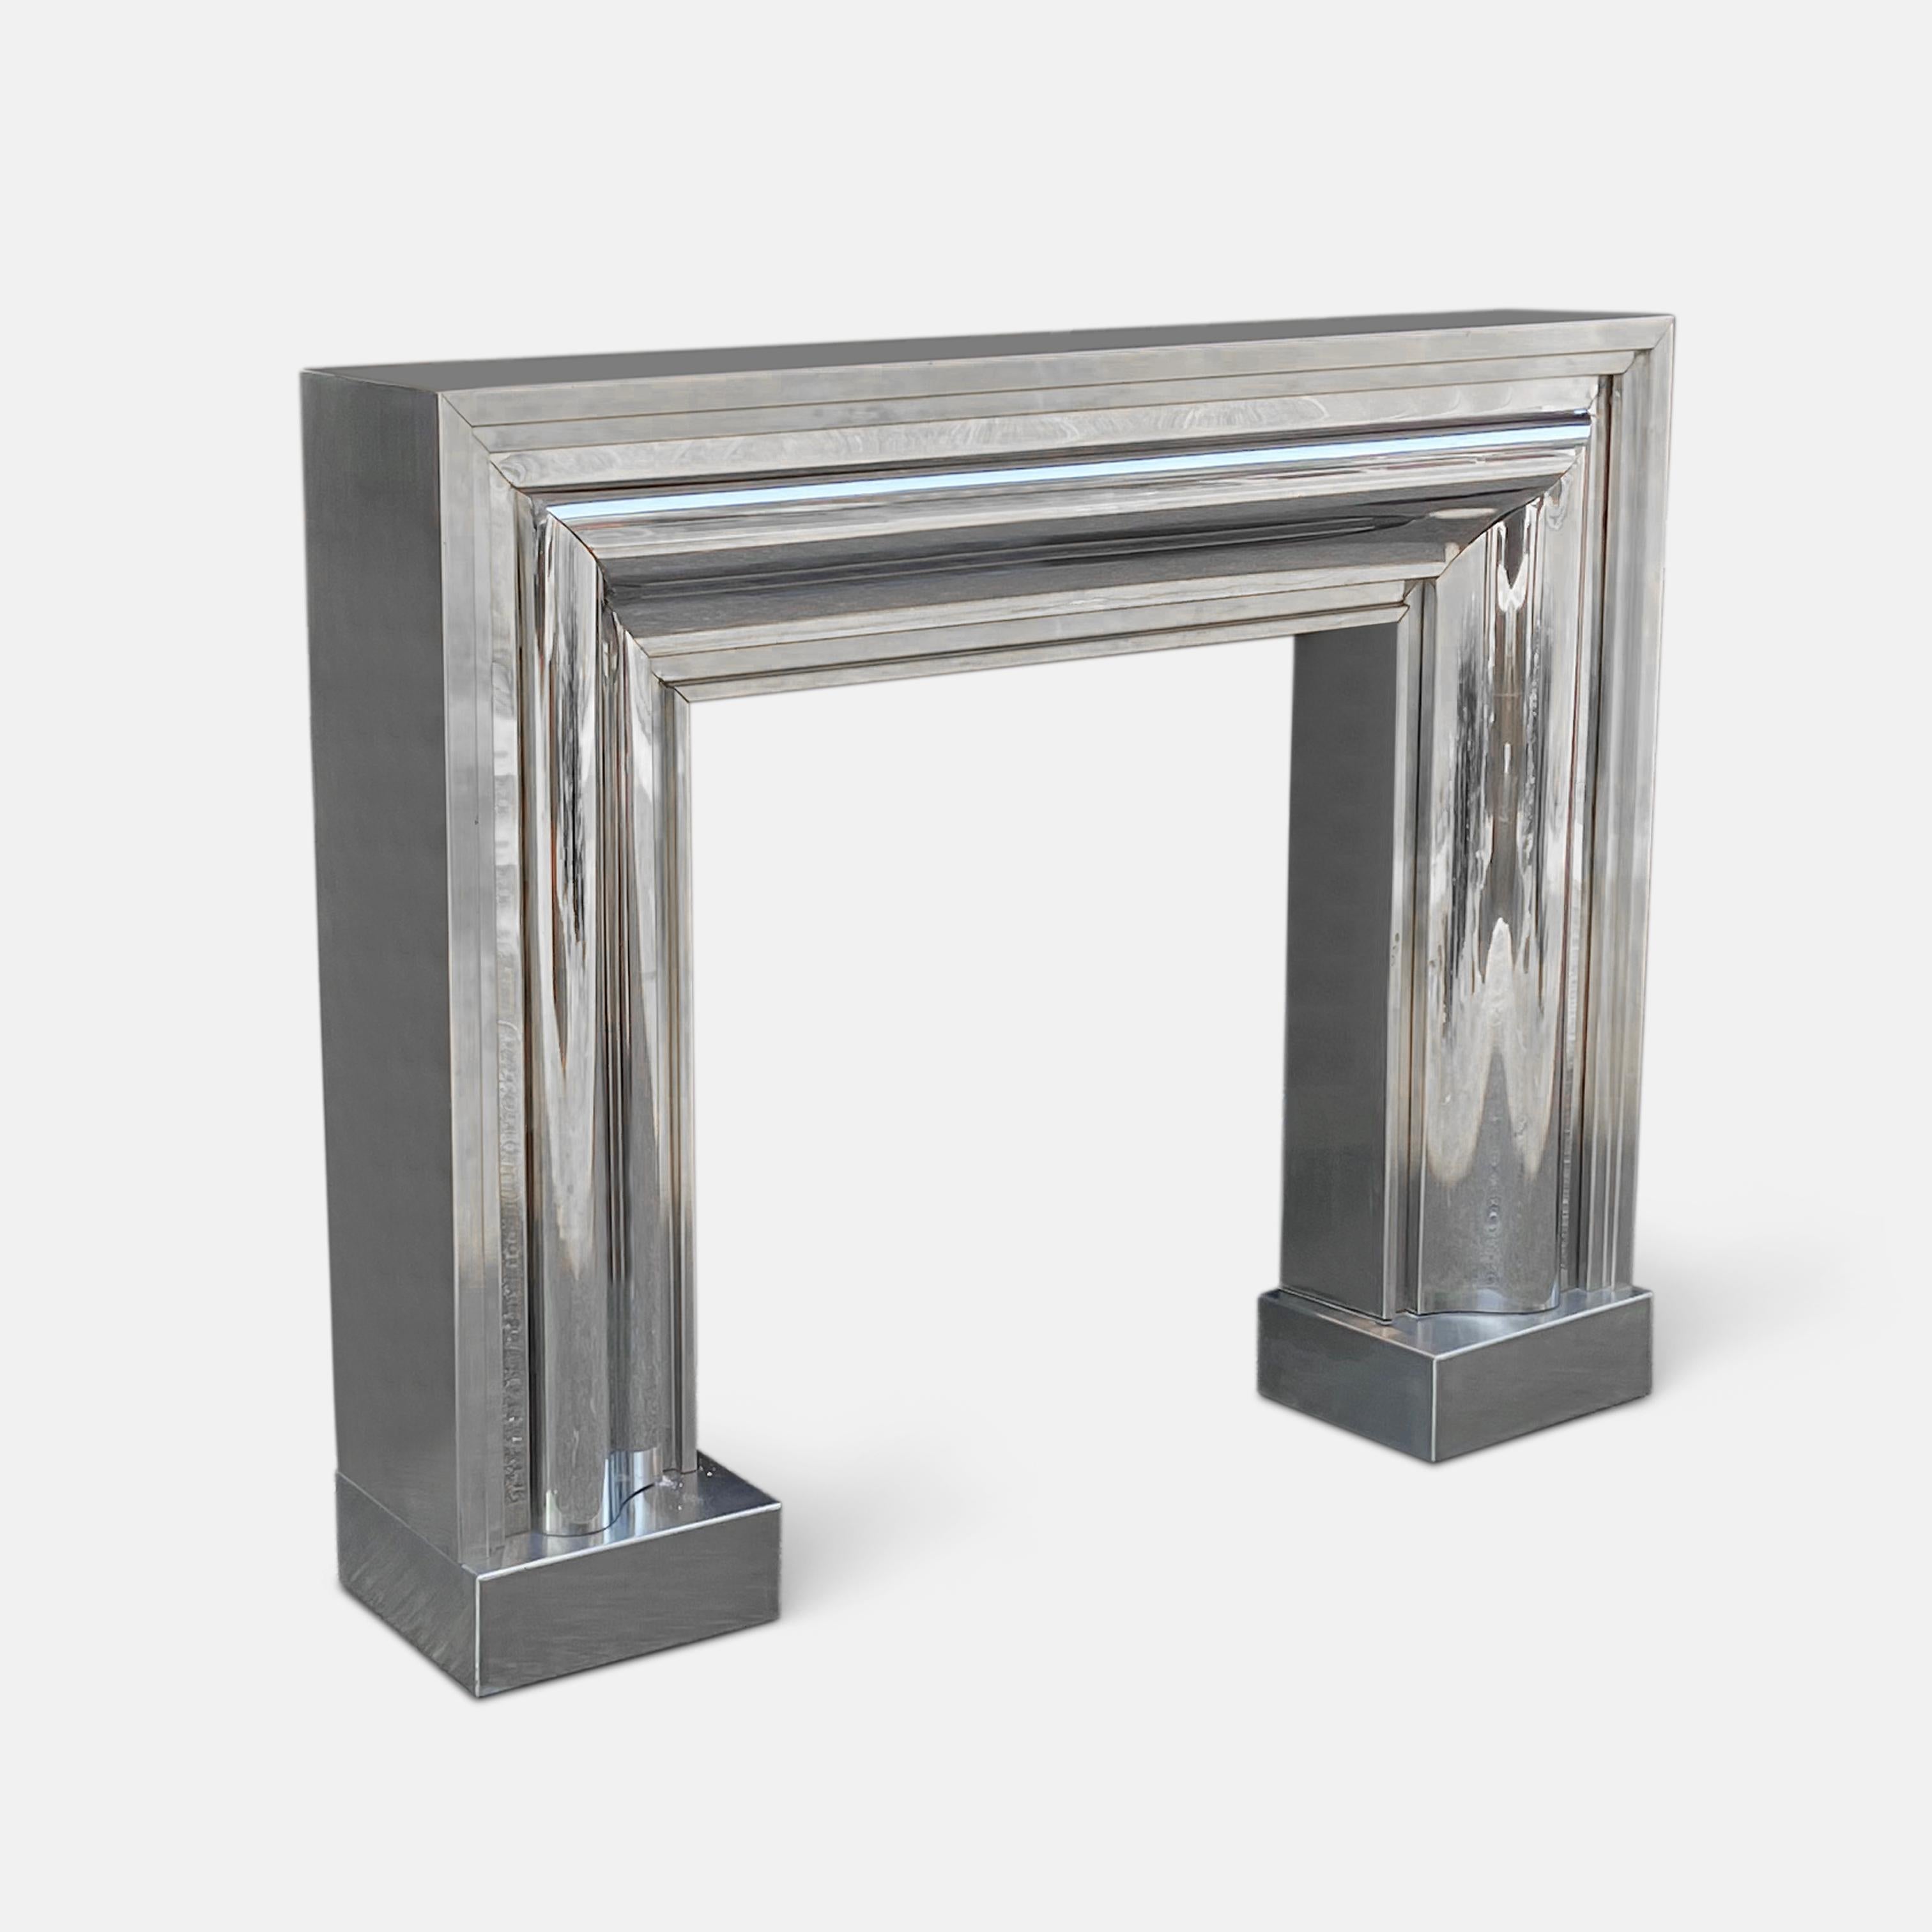 Fireplace surround by Sandro Petti for Maison Jansen circa 1970. 
A magnificent surround of stepped and curved form in chrome and steel raised on two low steel plinths.